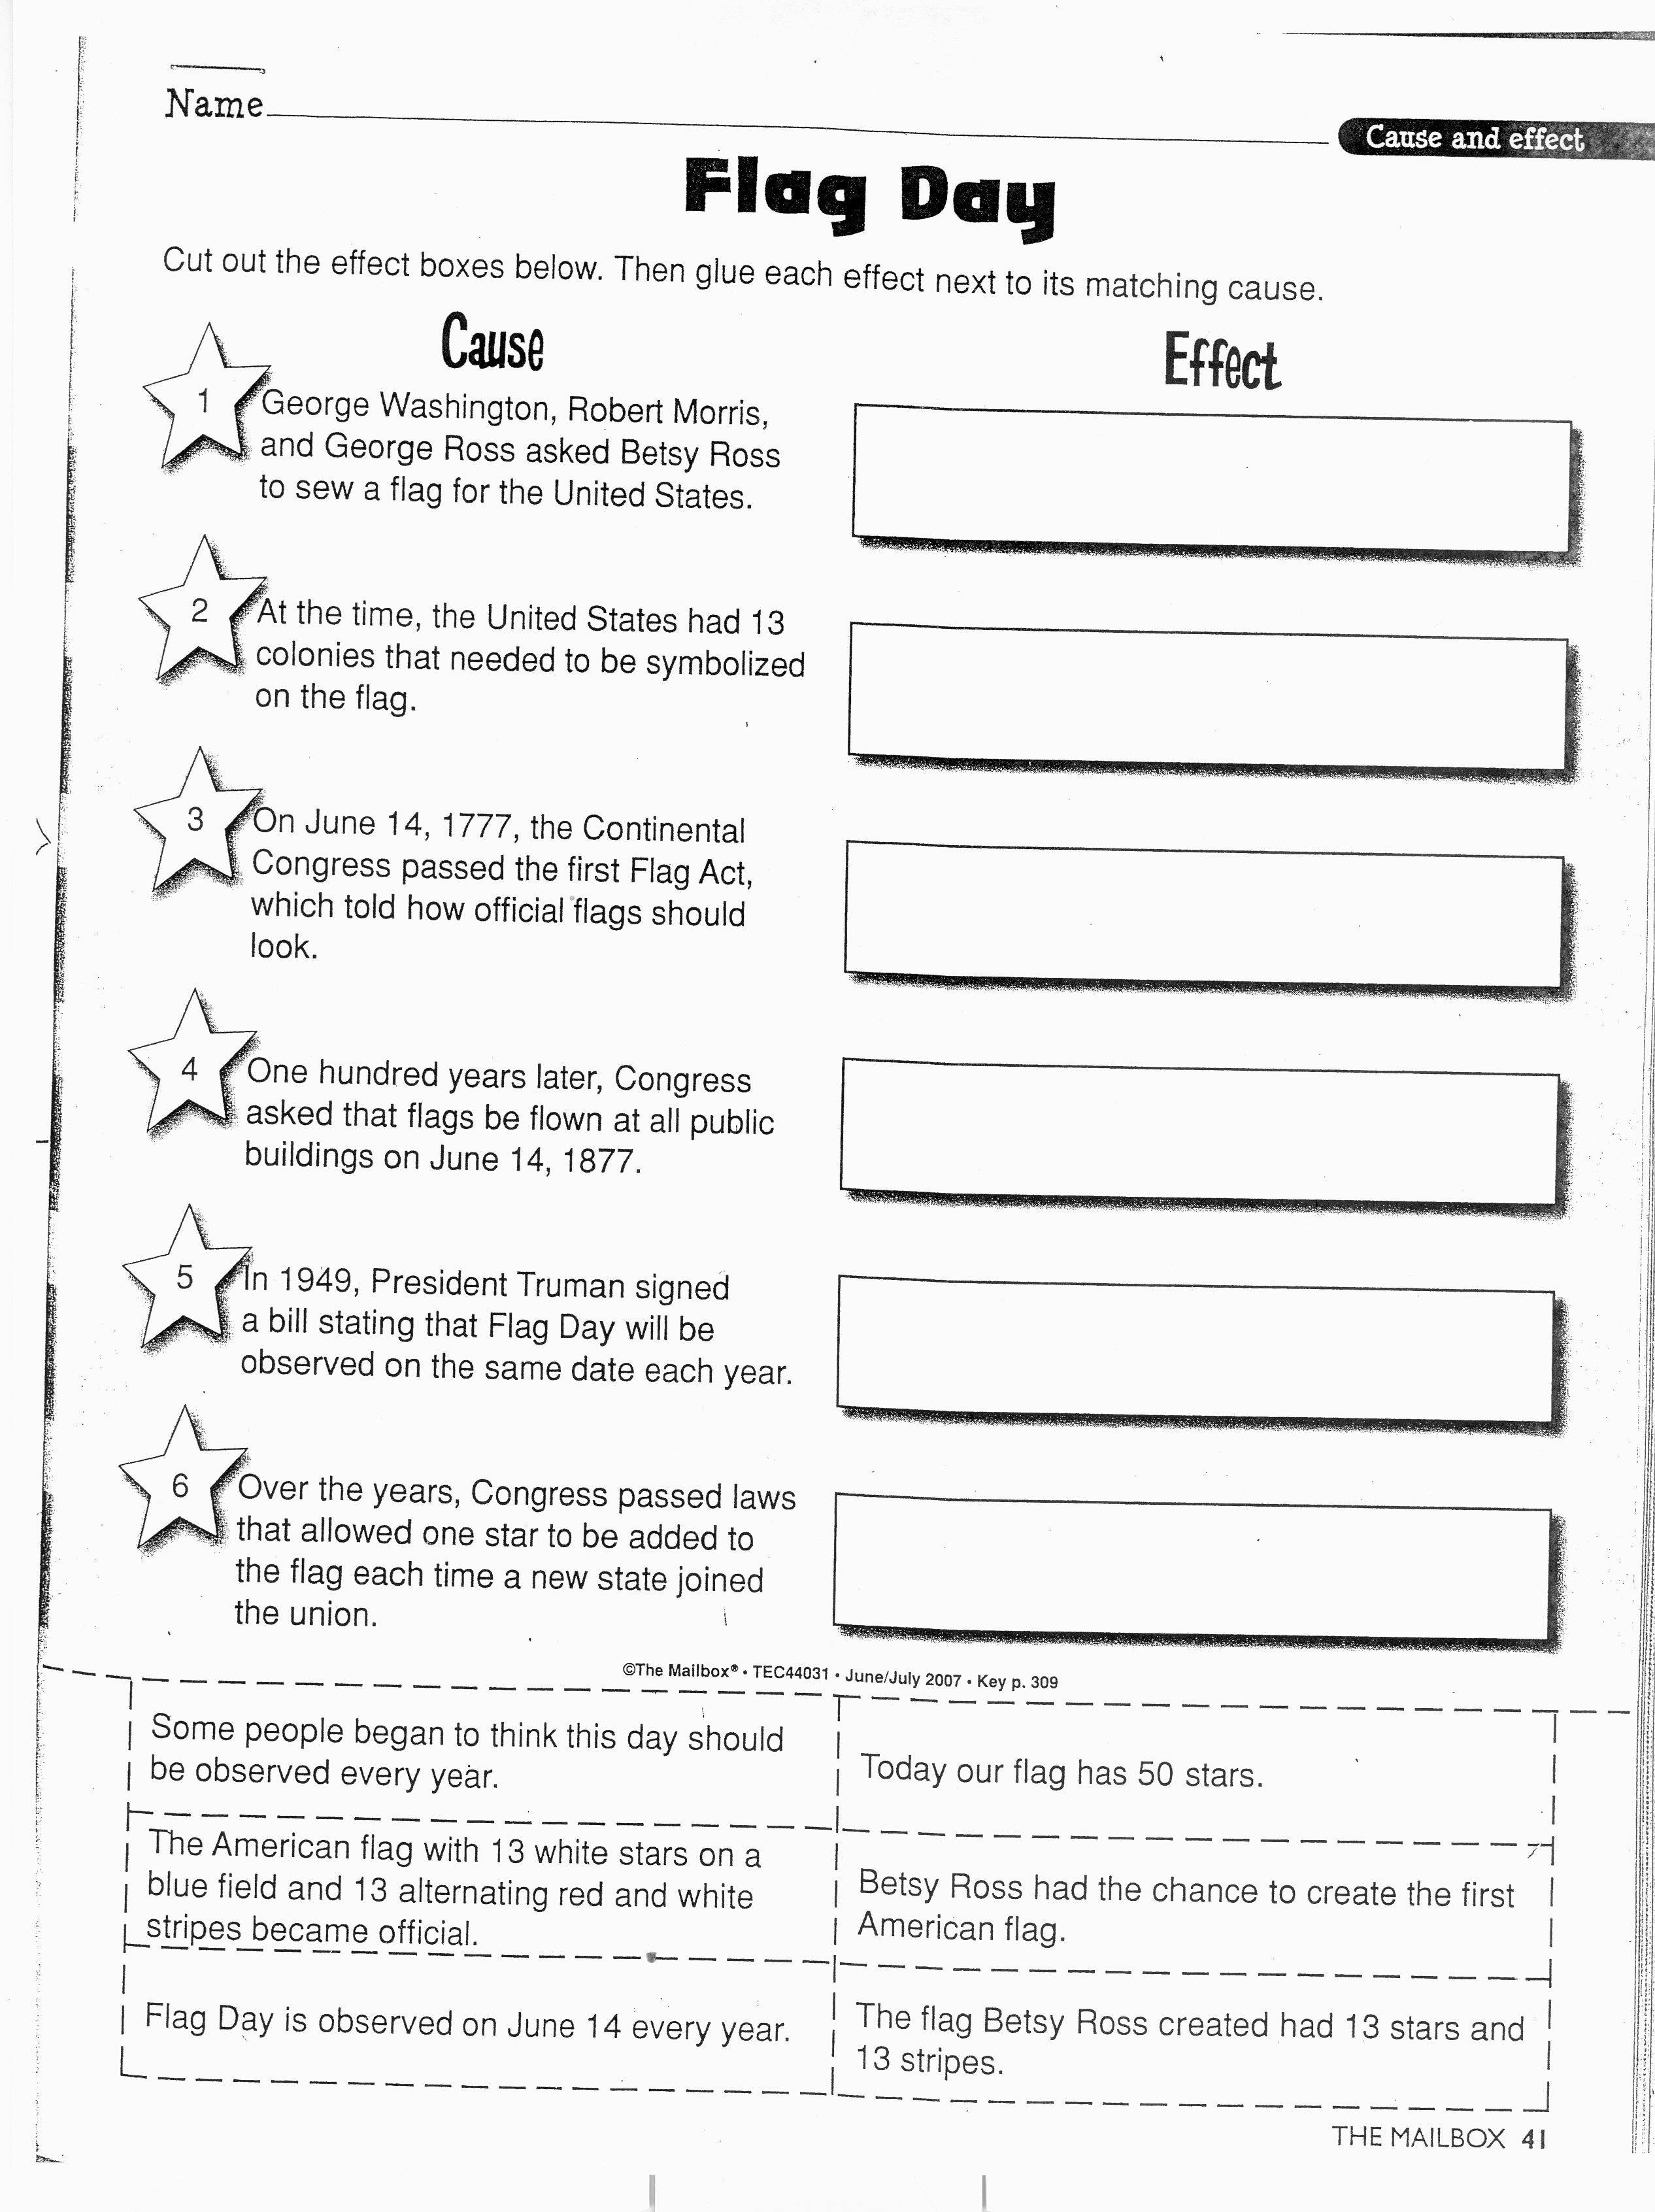 Cause and Effect Worksheets 8th Grade Image